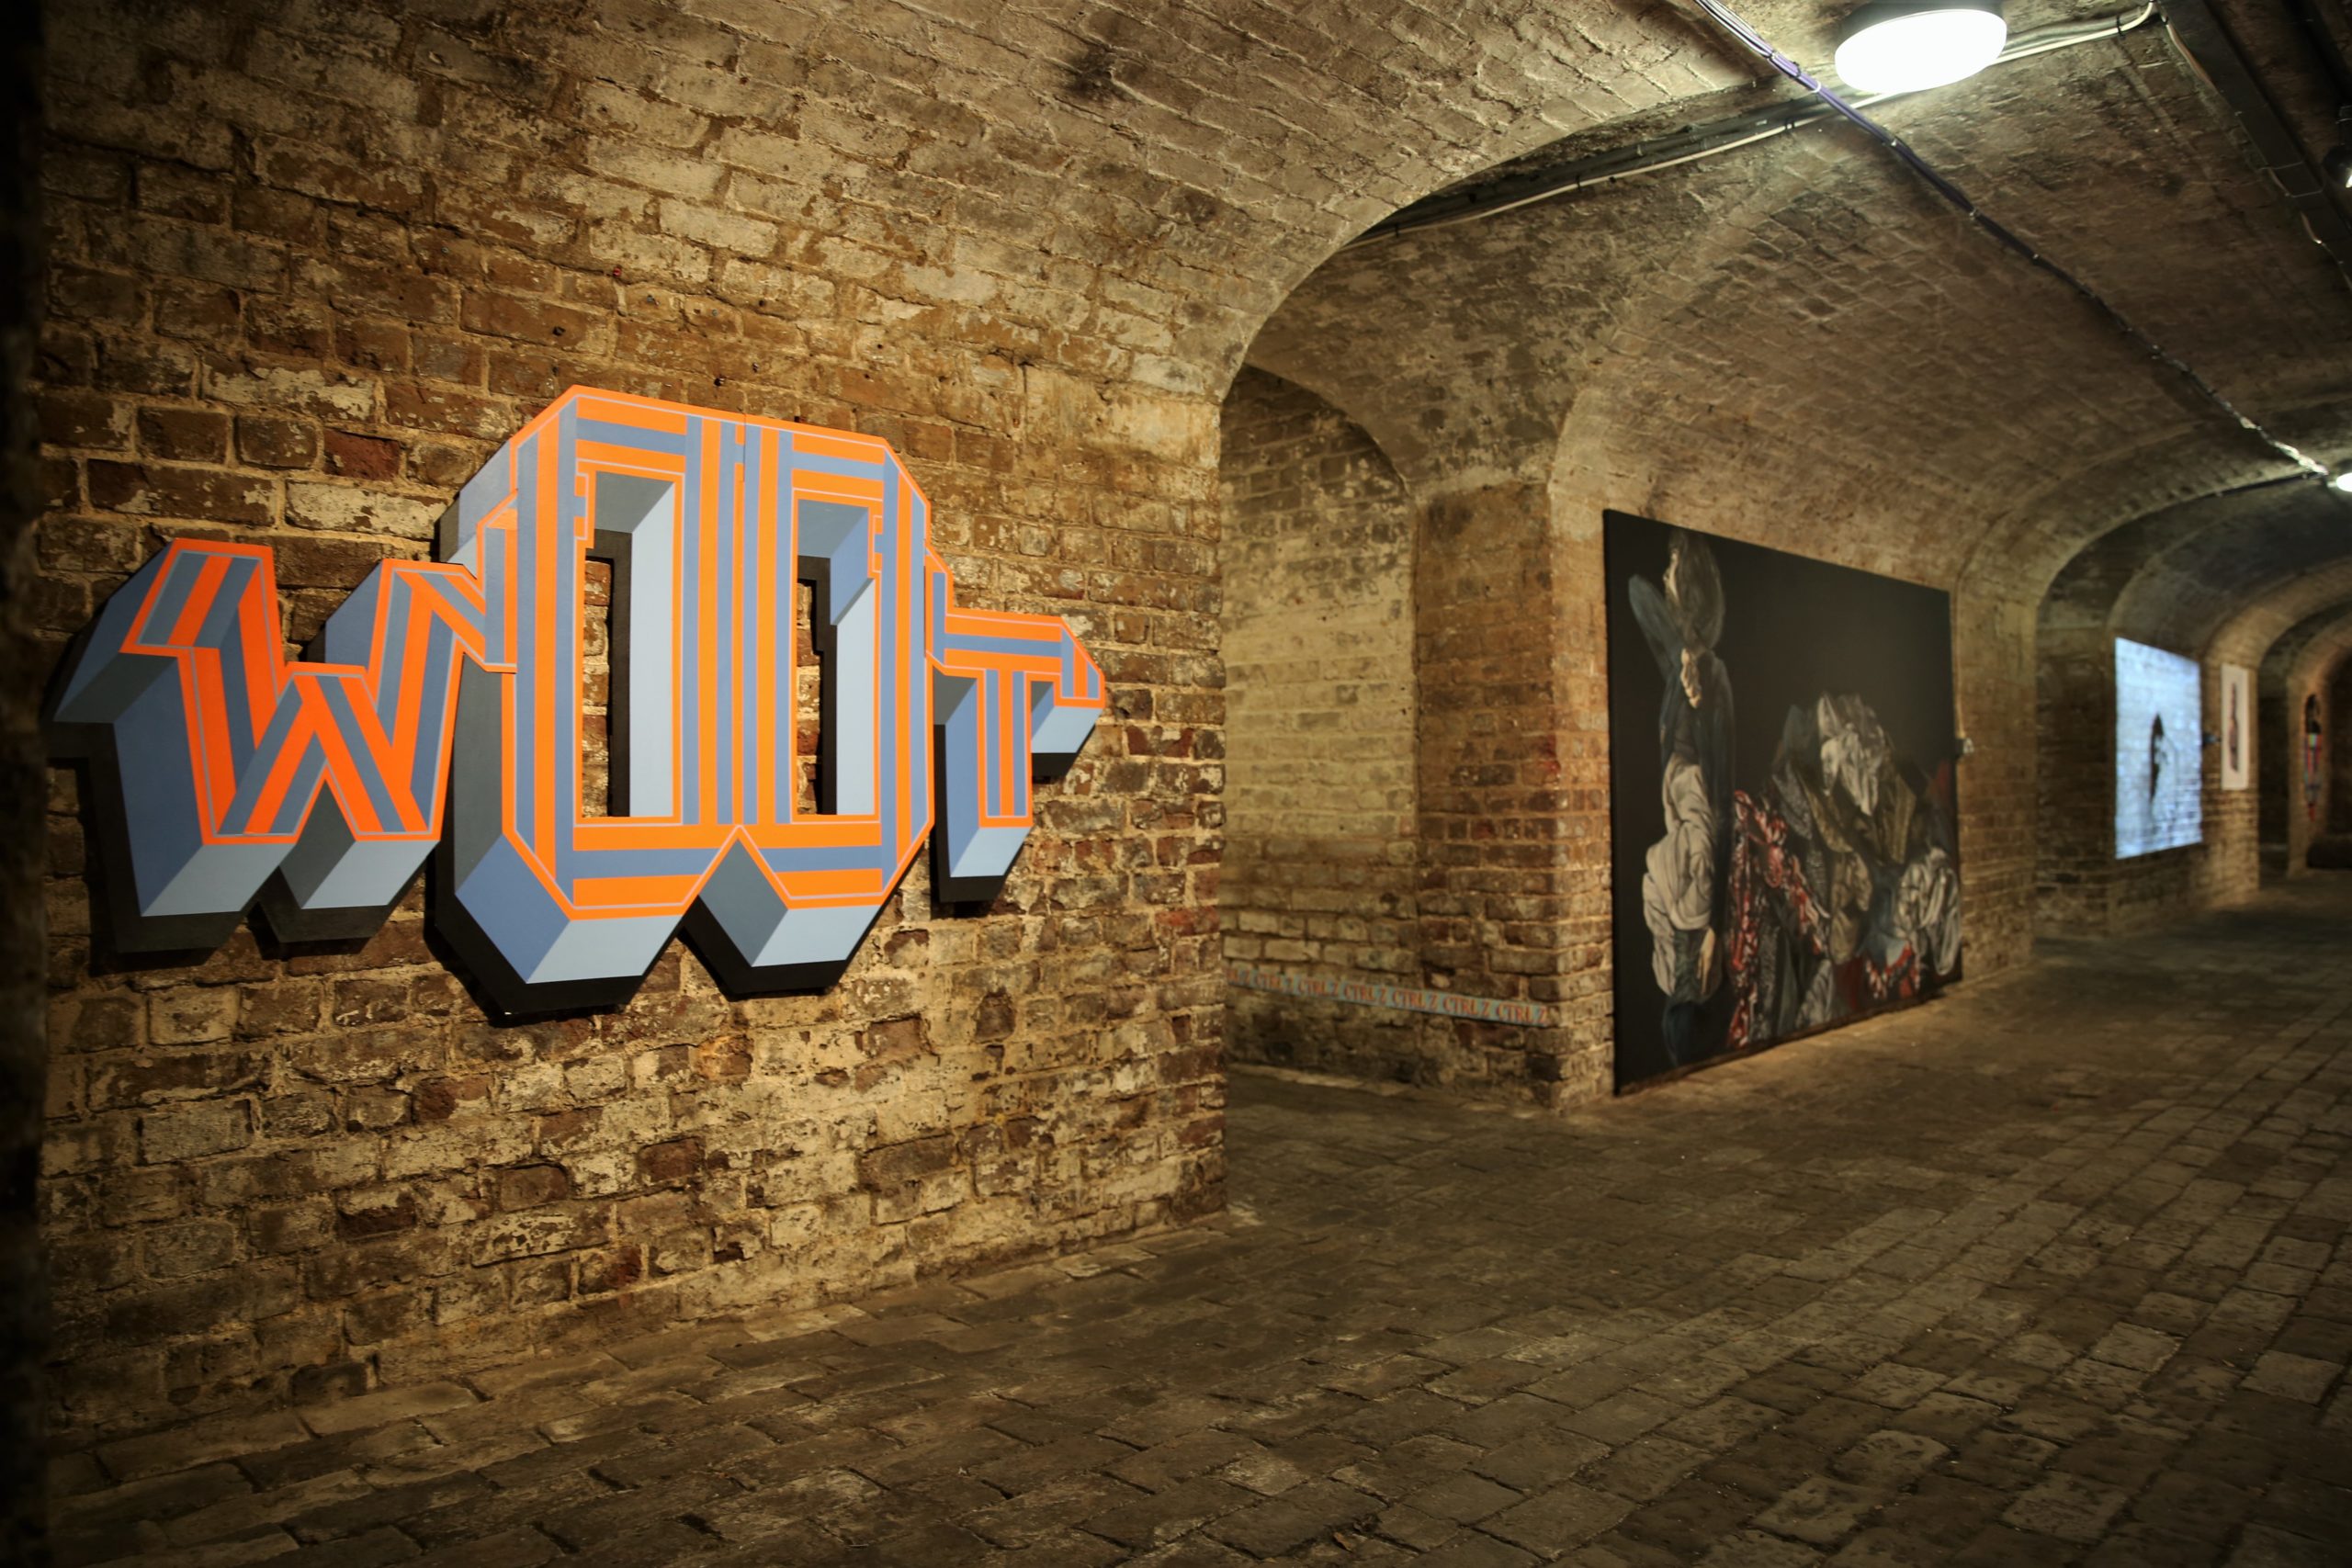 You do You, agence en residence, the crypt gallery, London, group show, Rouge, Priyesh Trivedi, Green Riot, Printemps, Dolly Devy, exposition, art